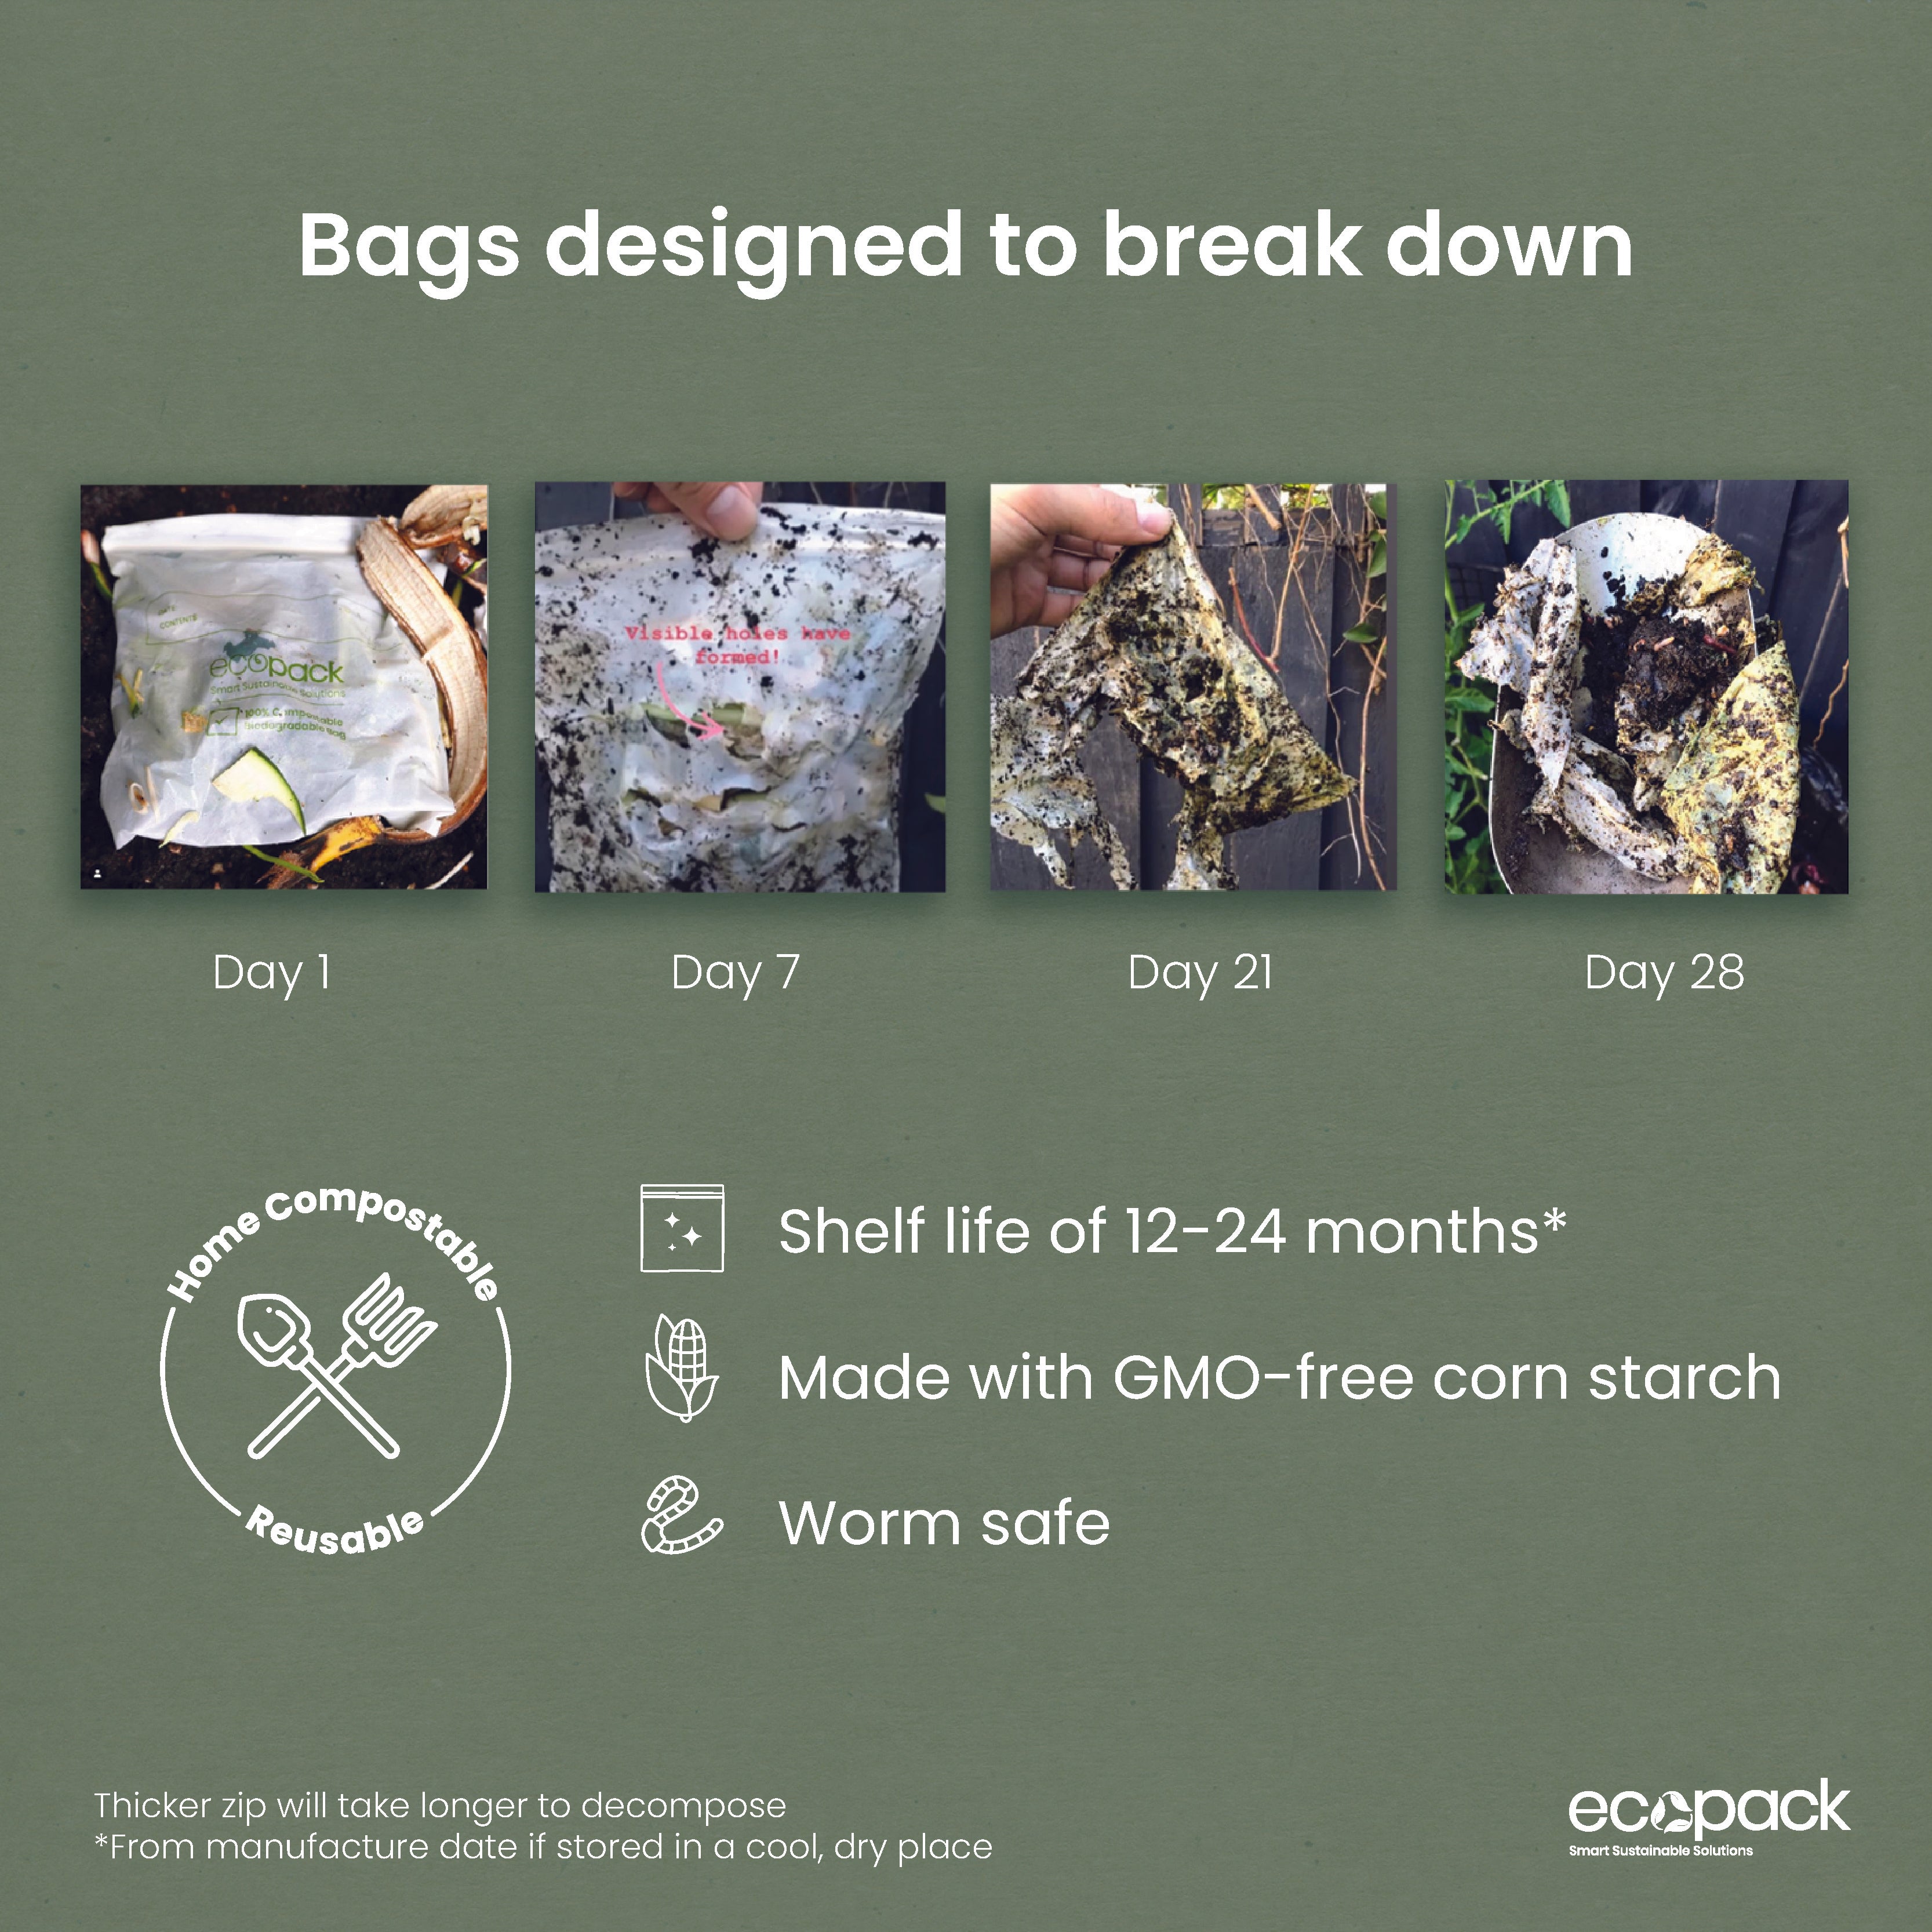 ED-2600 Compostable Resealable Sandwich Bags